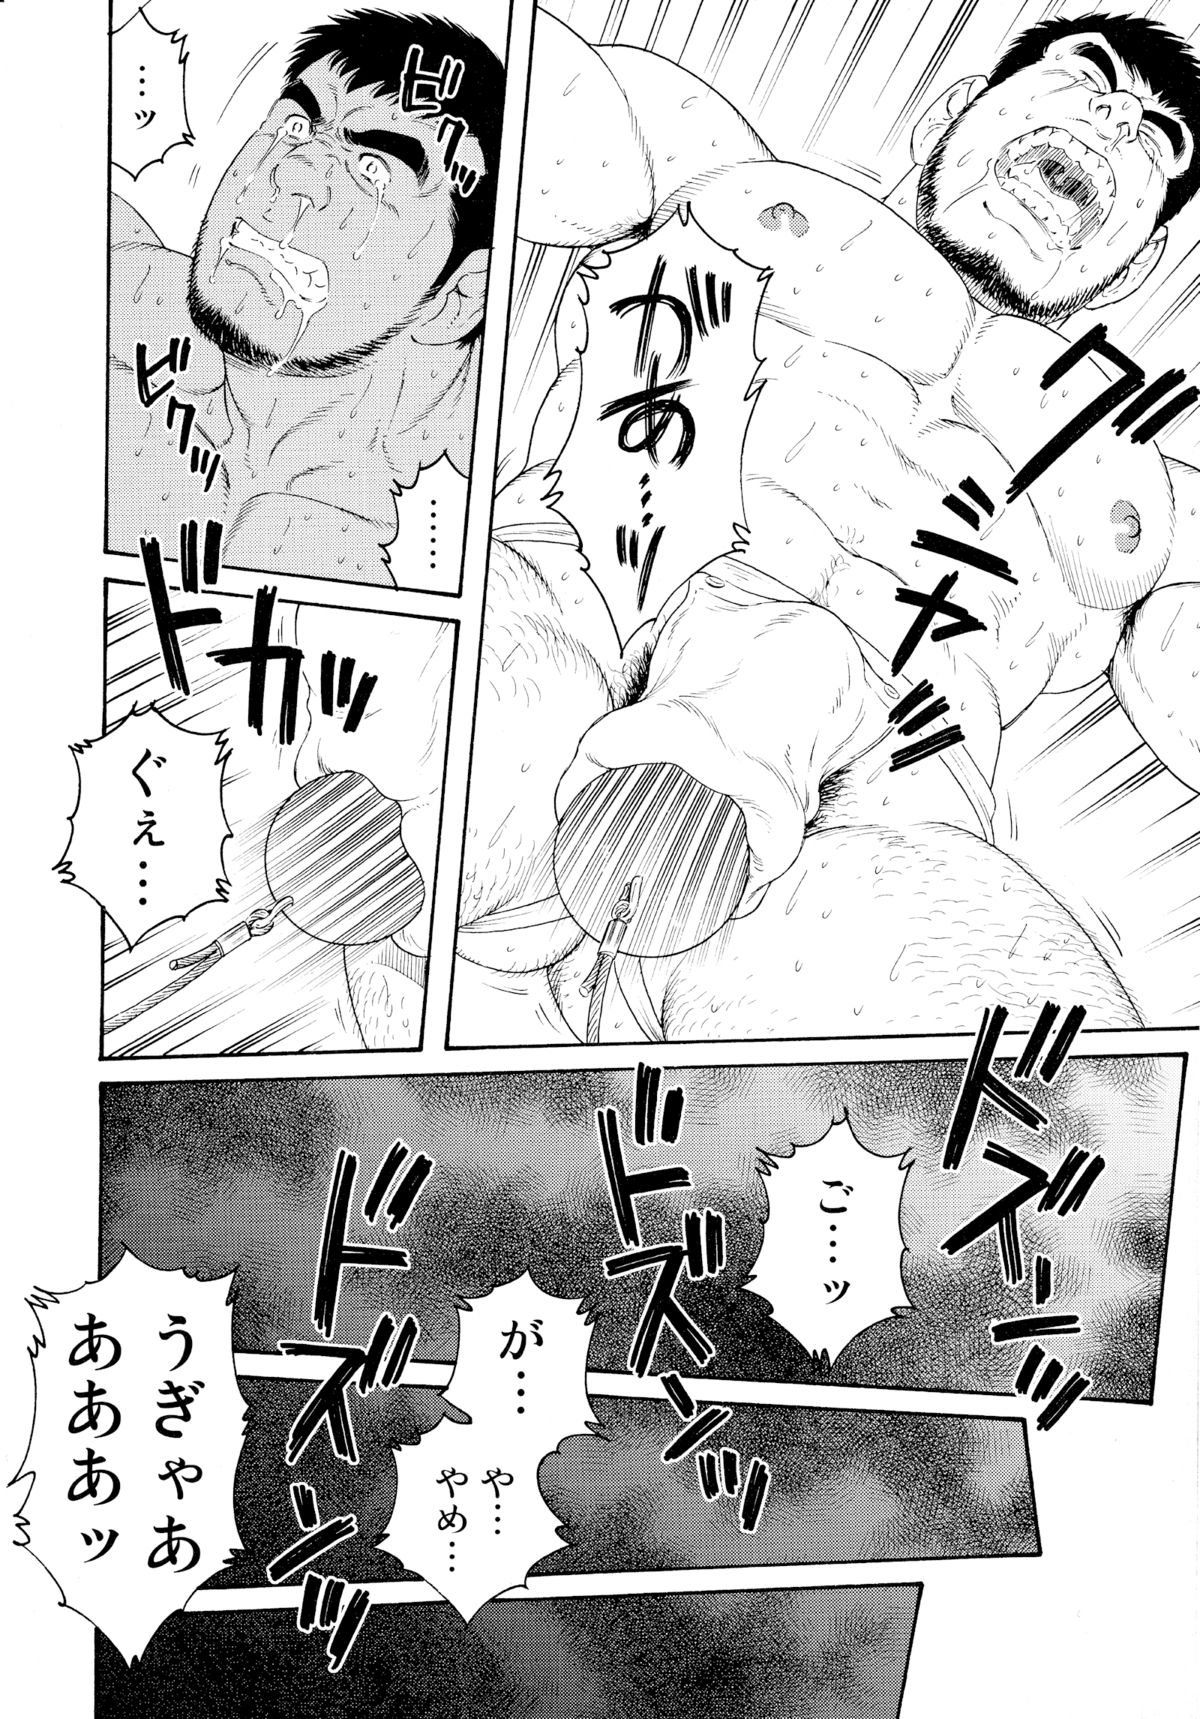 [Gengoroh Tagame] Standing Ovation page 6 full